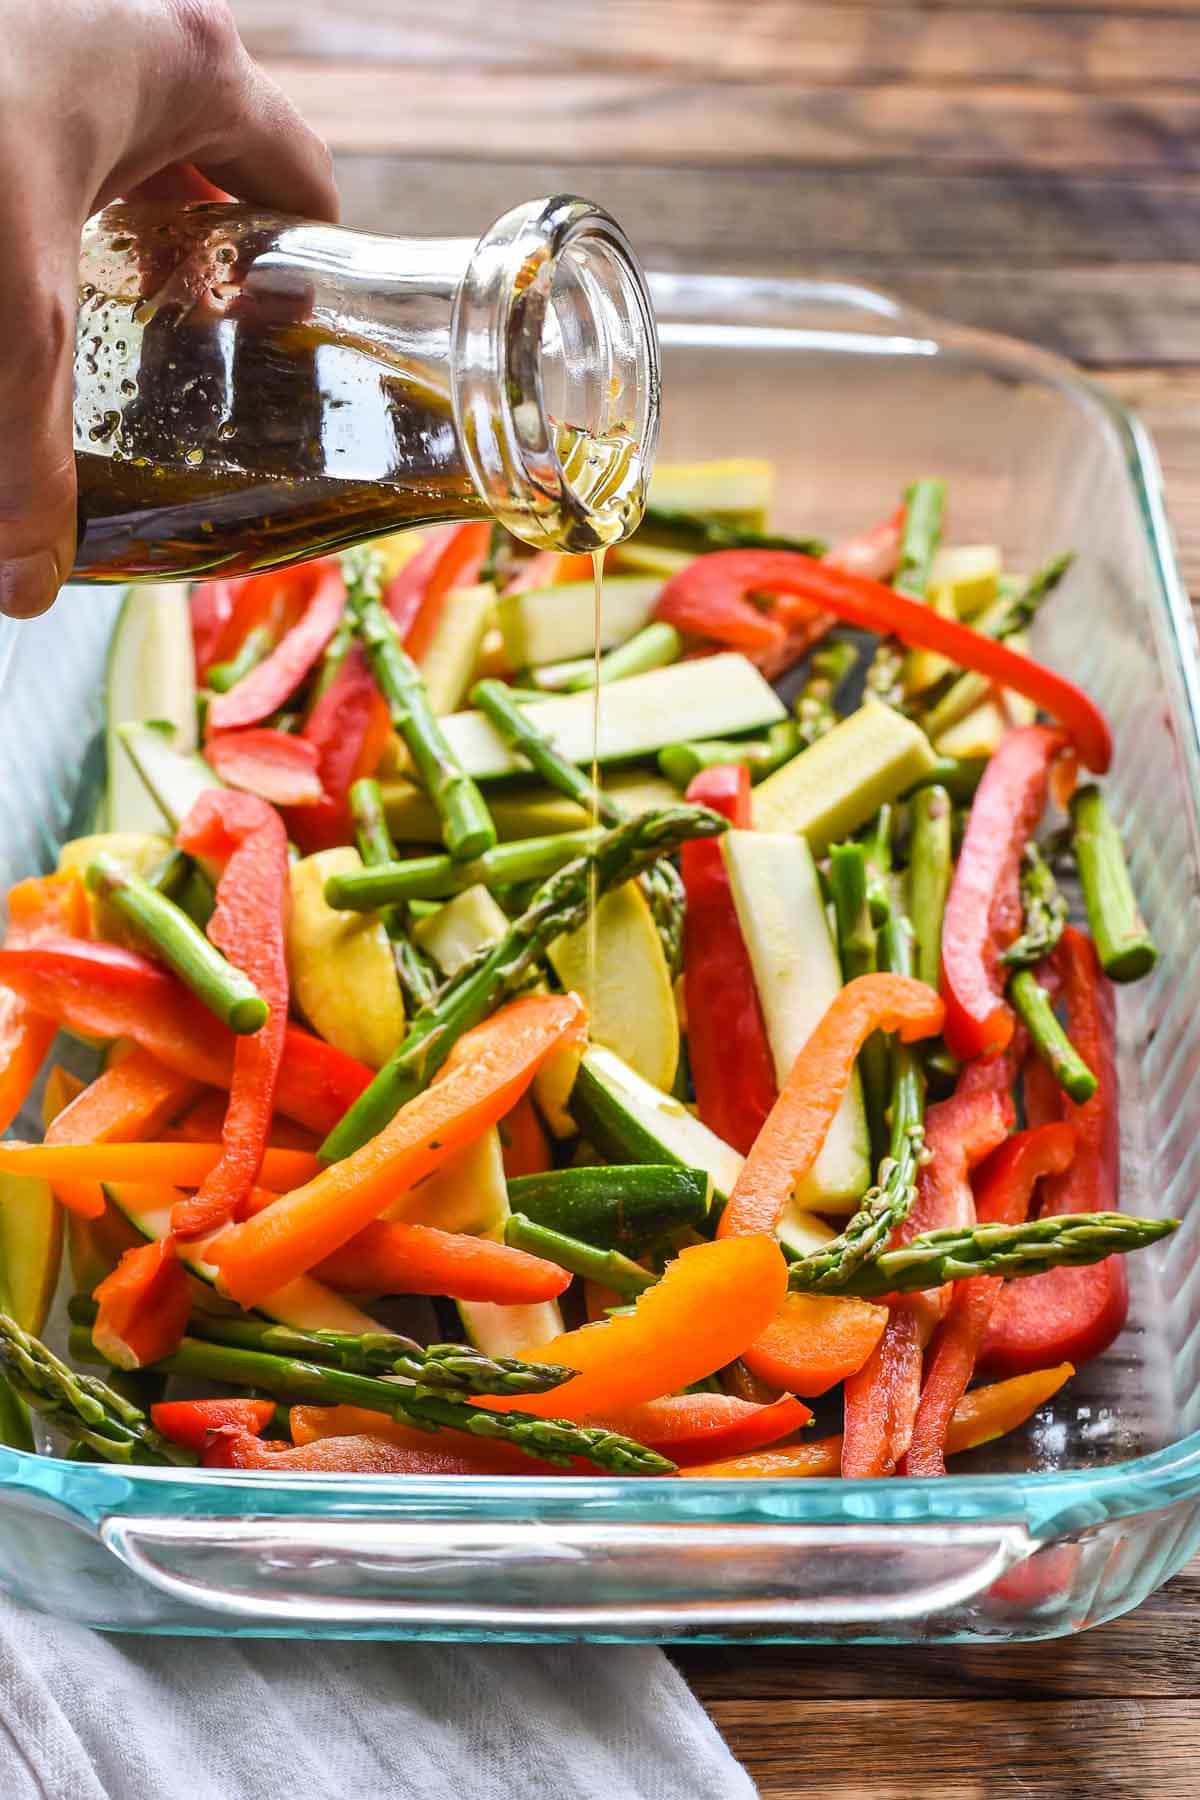 Vegetables in a glass baking dish with bottle pouring balsamic marinade on top, featured as a side for burgers and hot dogs.